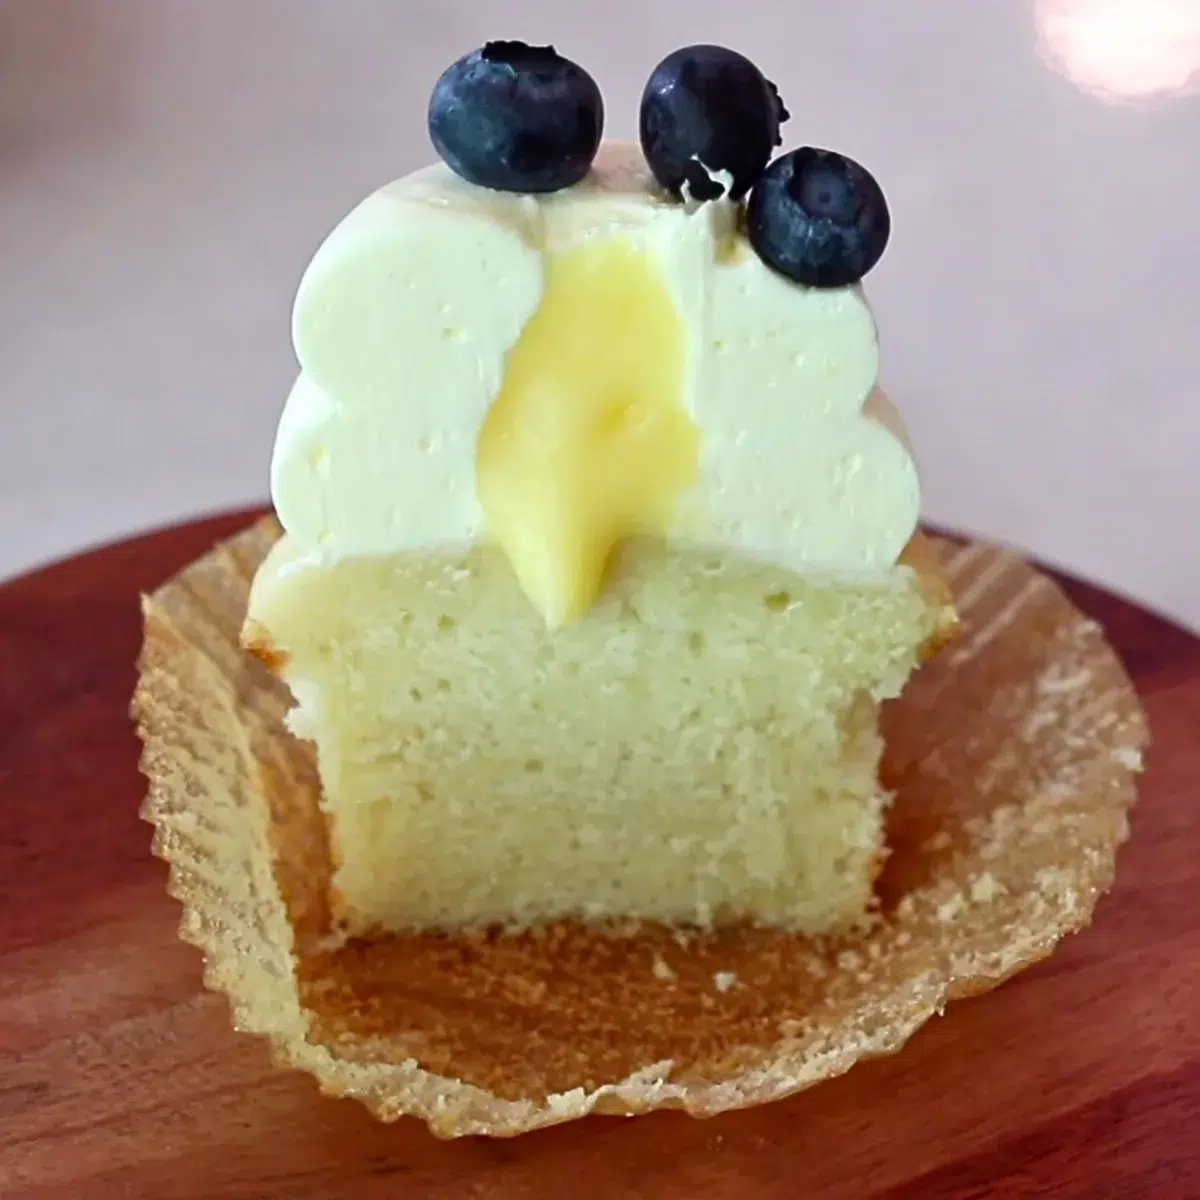 a lemon cupcake with lemon frosting and blueberries on top, cut in half